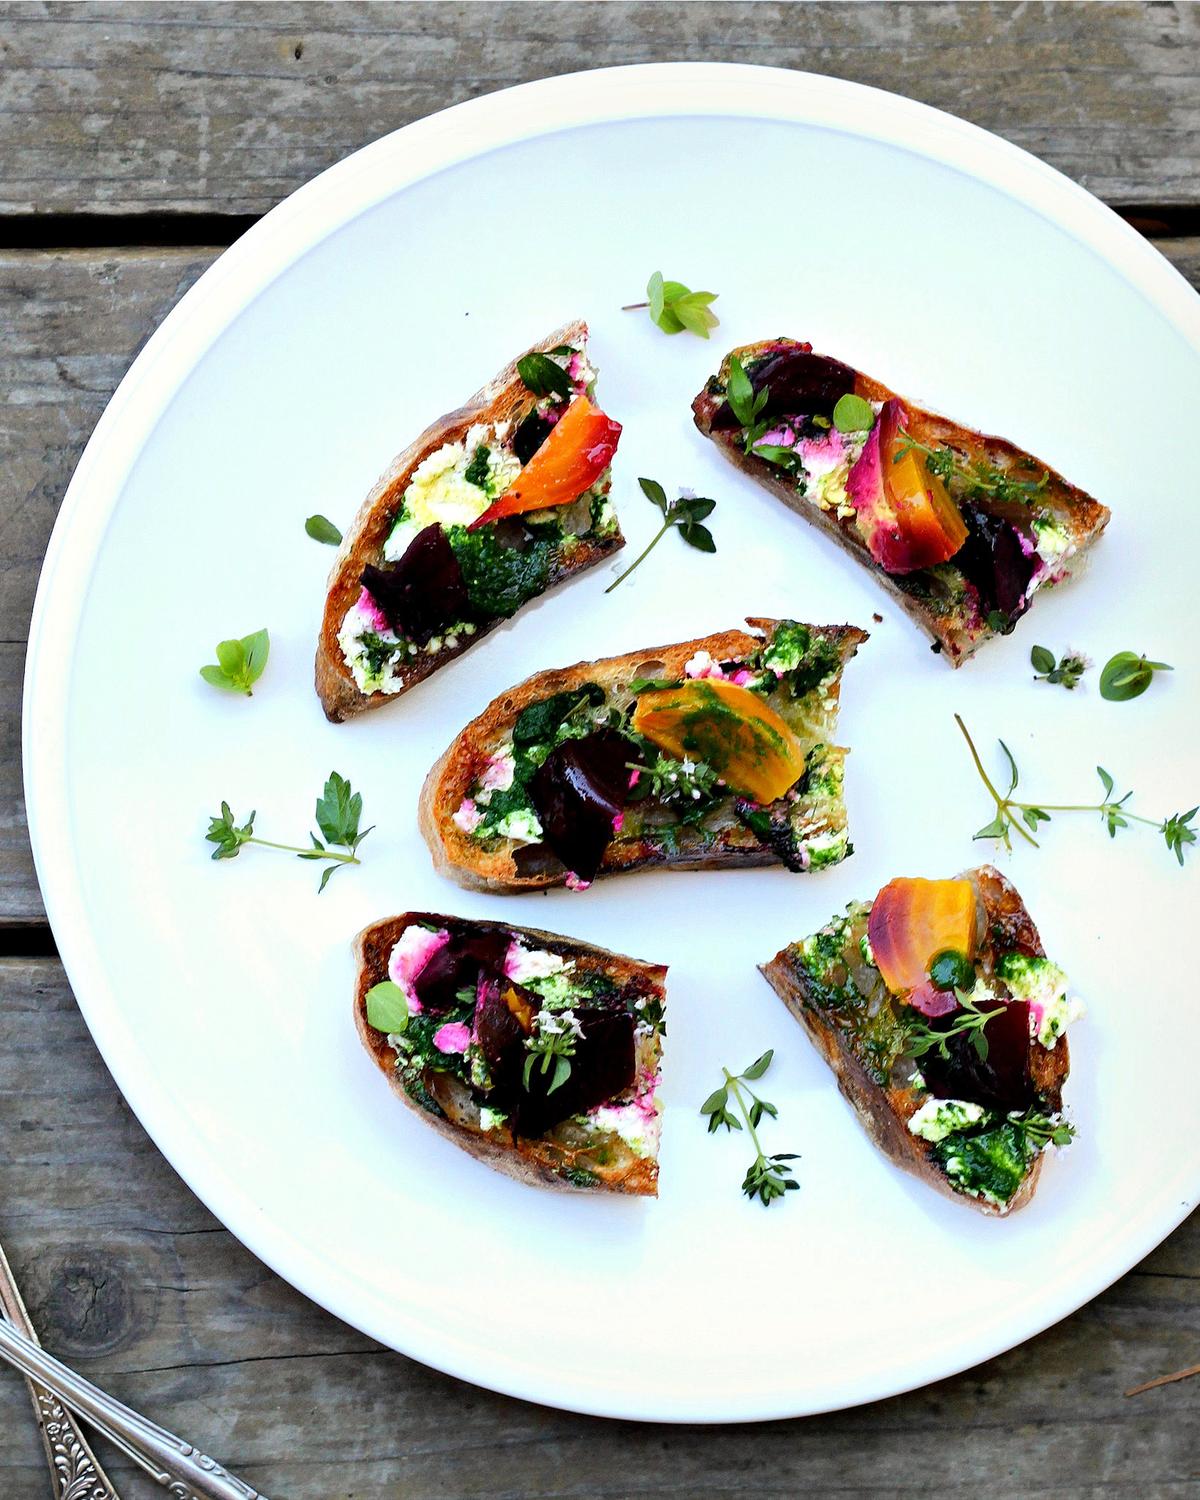 This piece of sandwich art features creamy goat cheese, roasted baby beets, and a vibrant garden pesto. (Lynda Balslev for Tastefood)